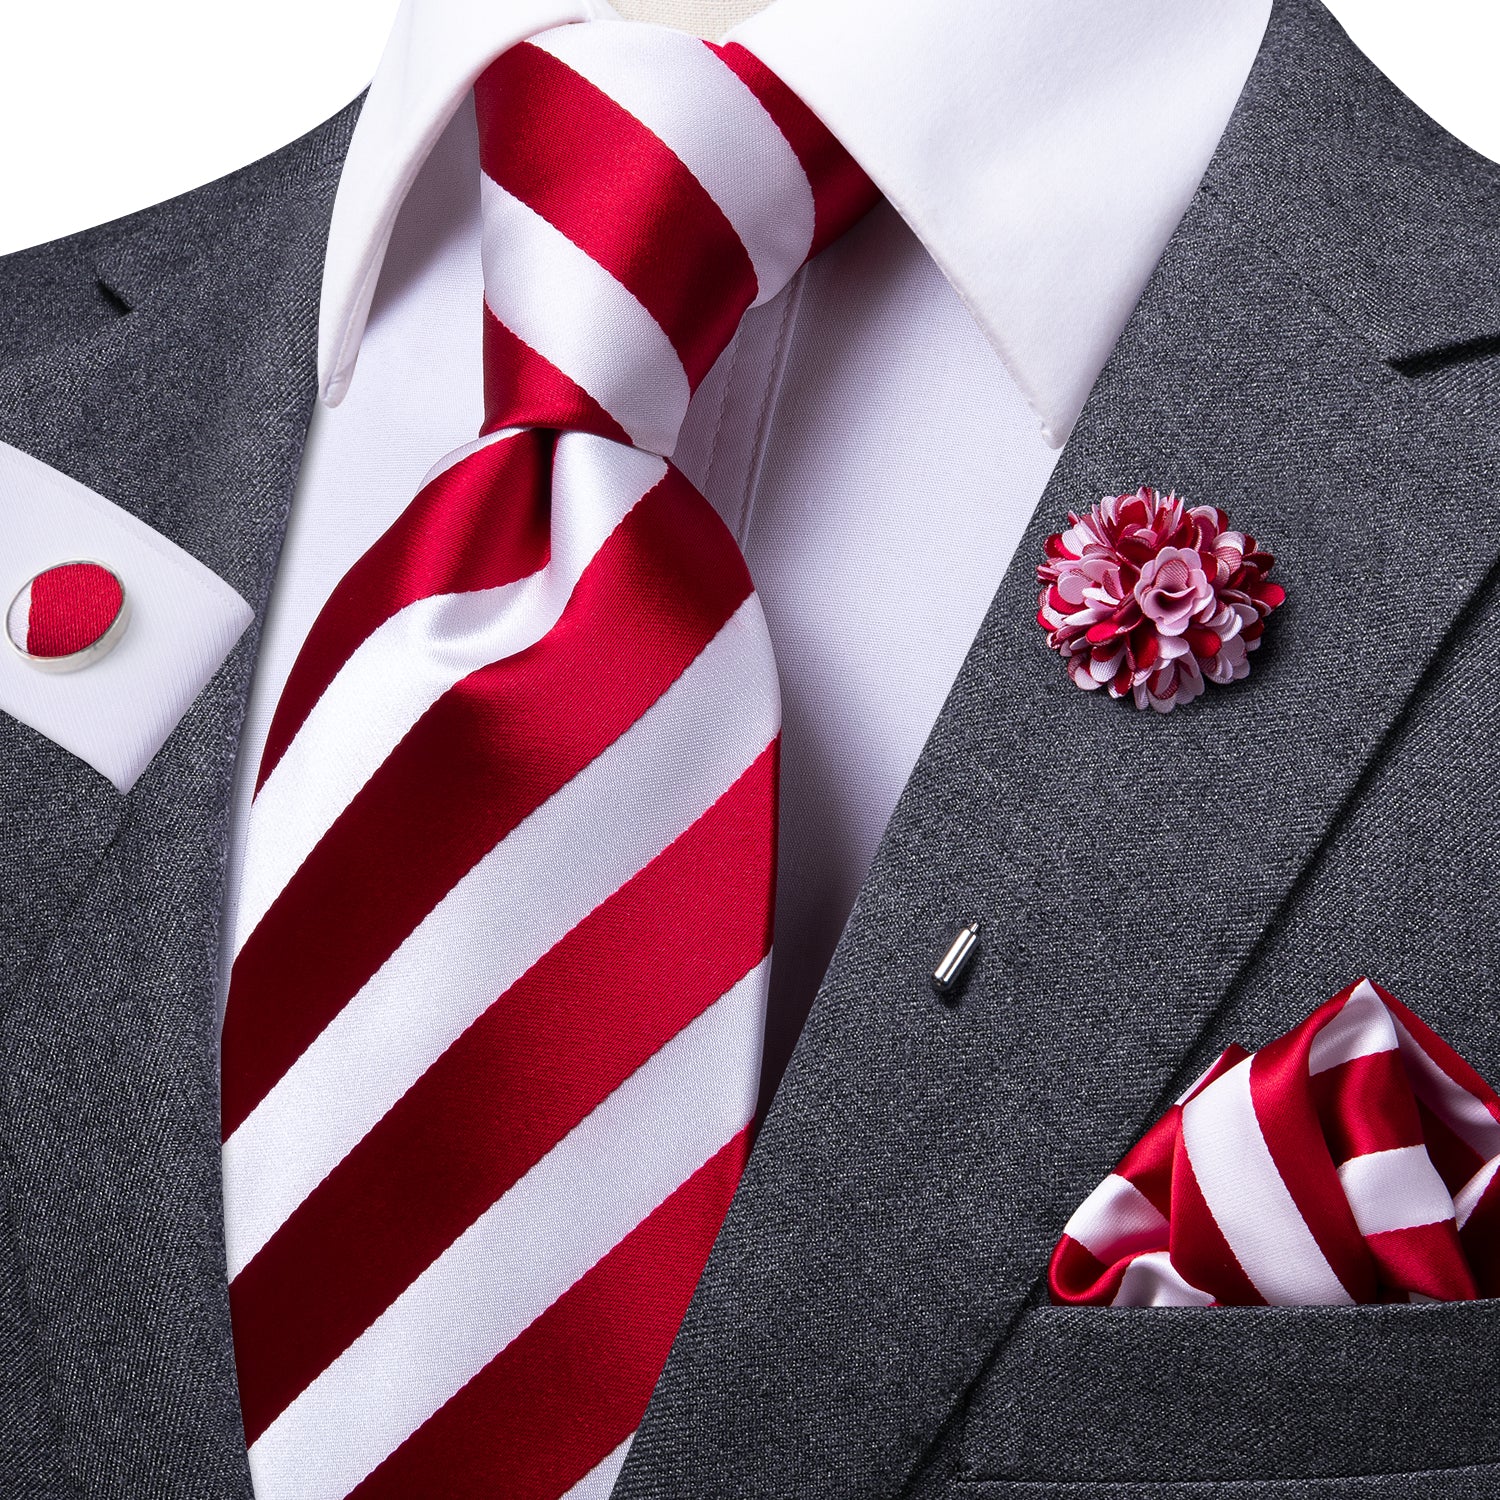 Red White Striped Tie Pocket Square Cufflinks Set with Brooch